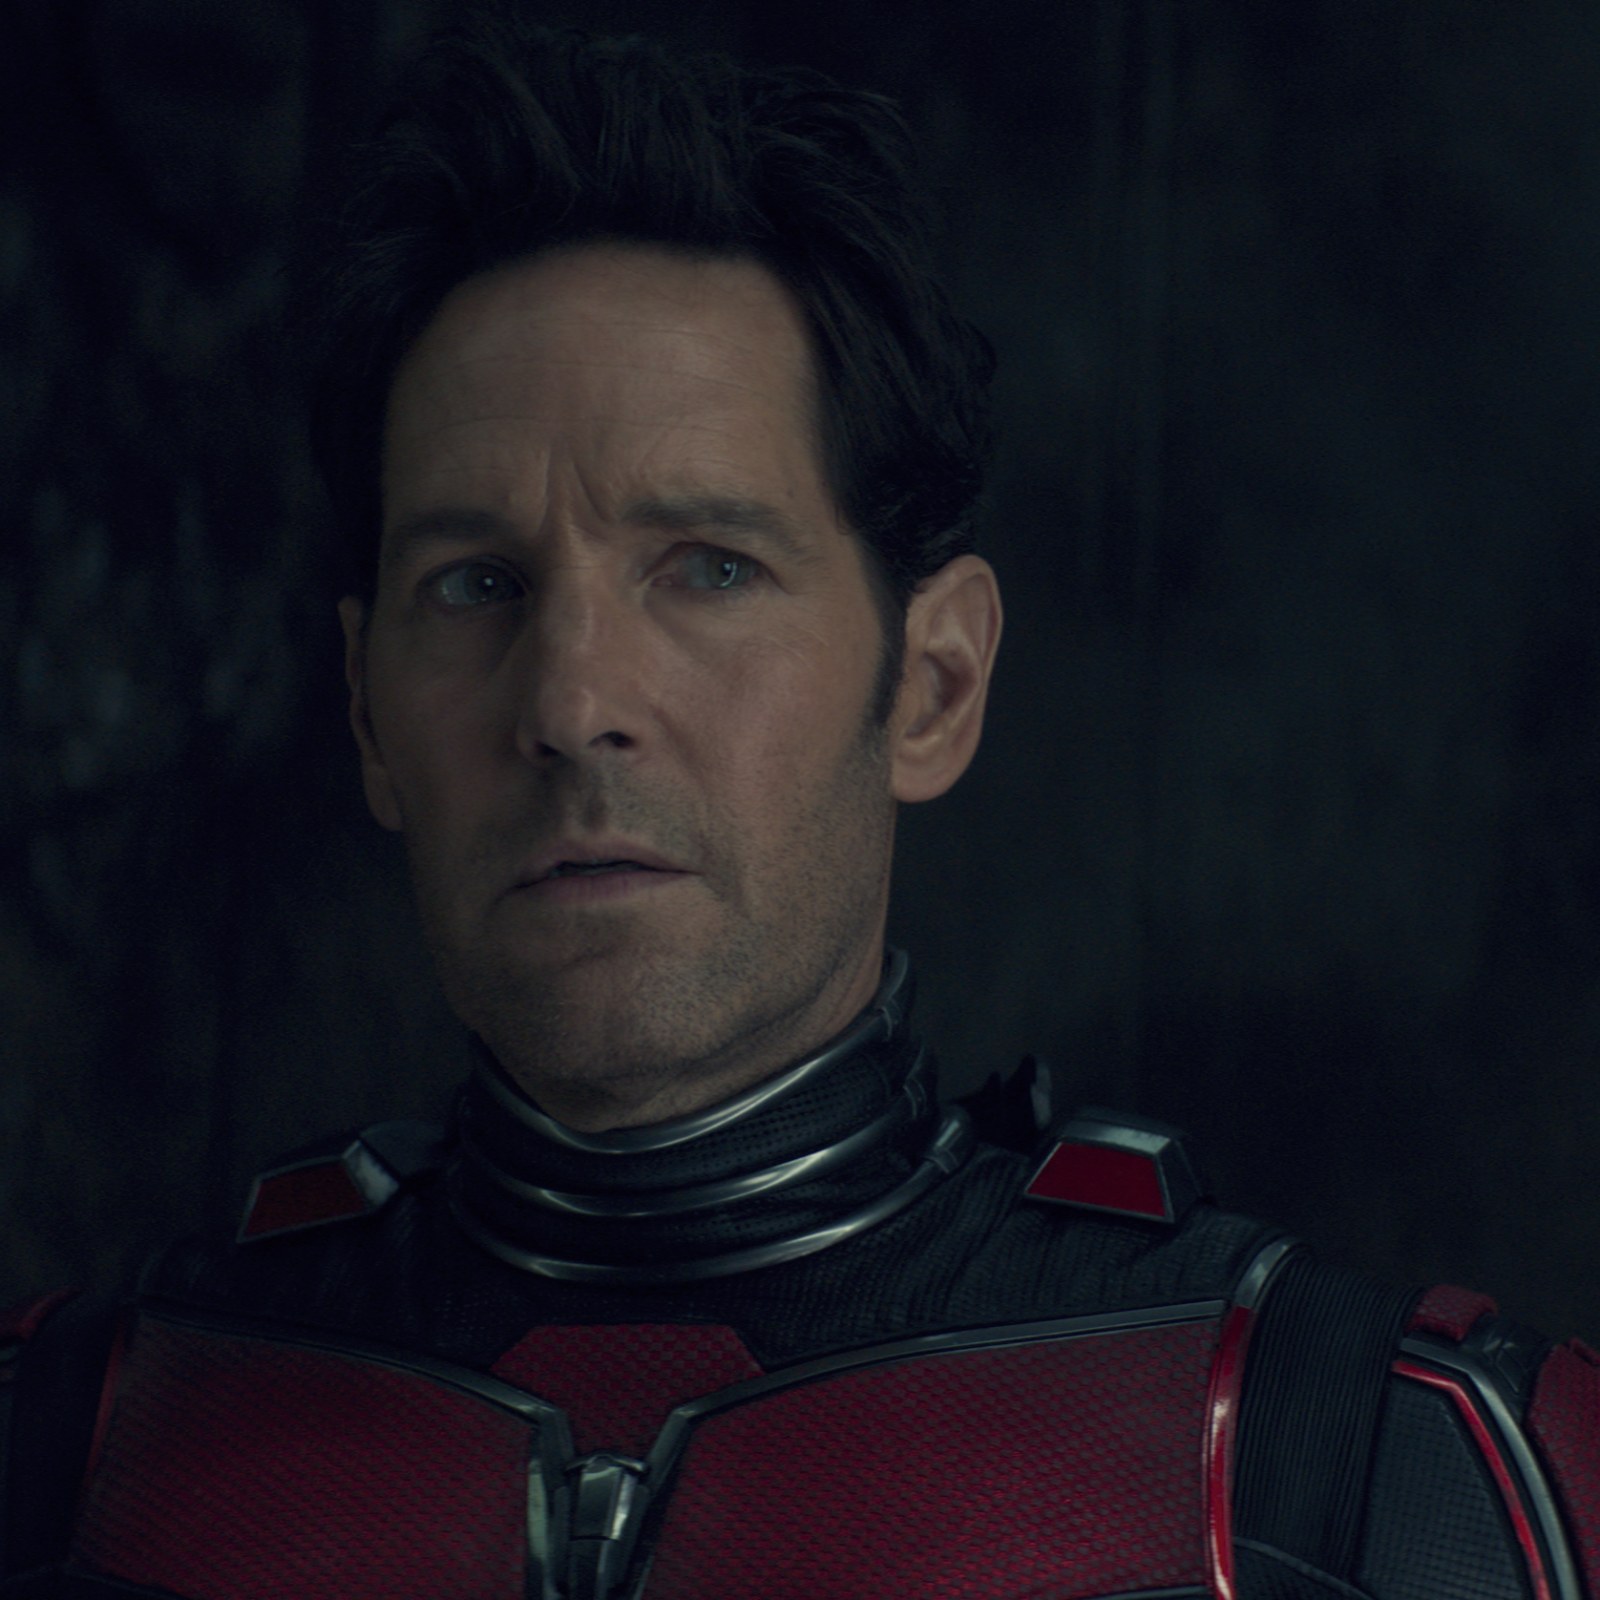 Ant-Man and the Wasp: Quantumania cast tease new film